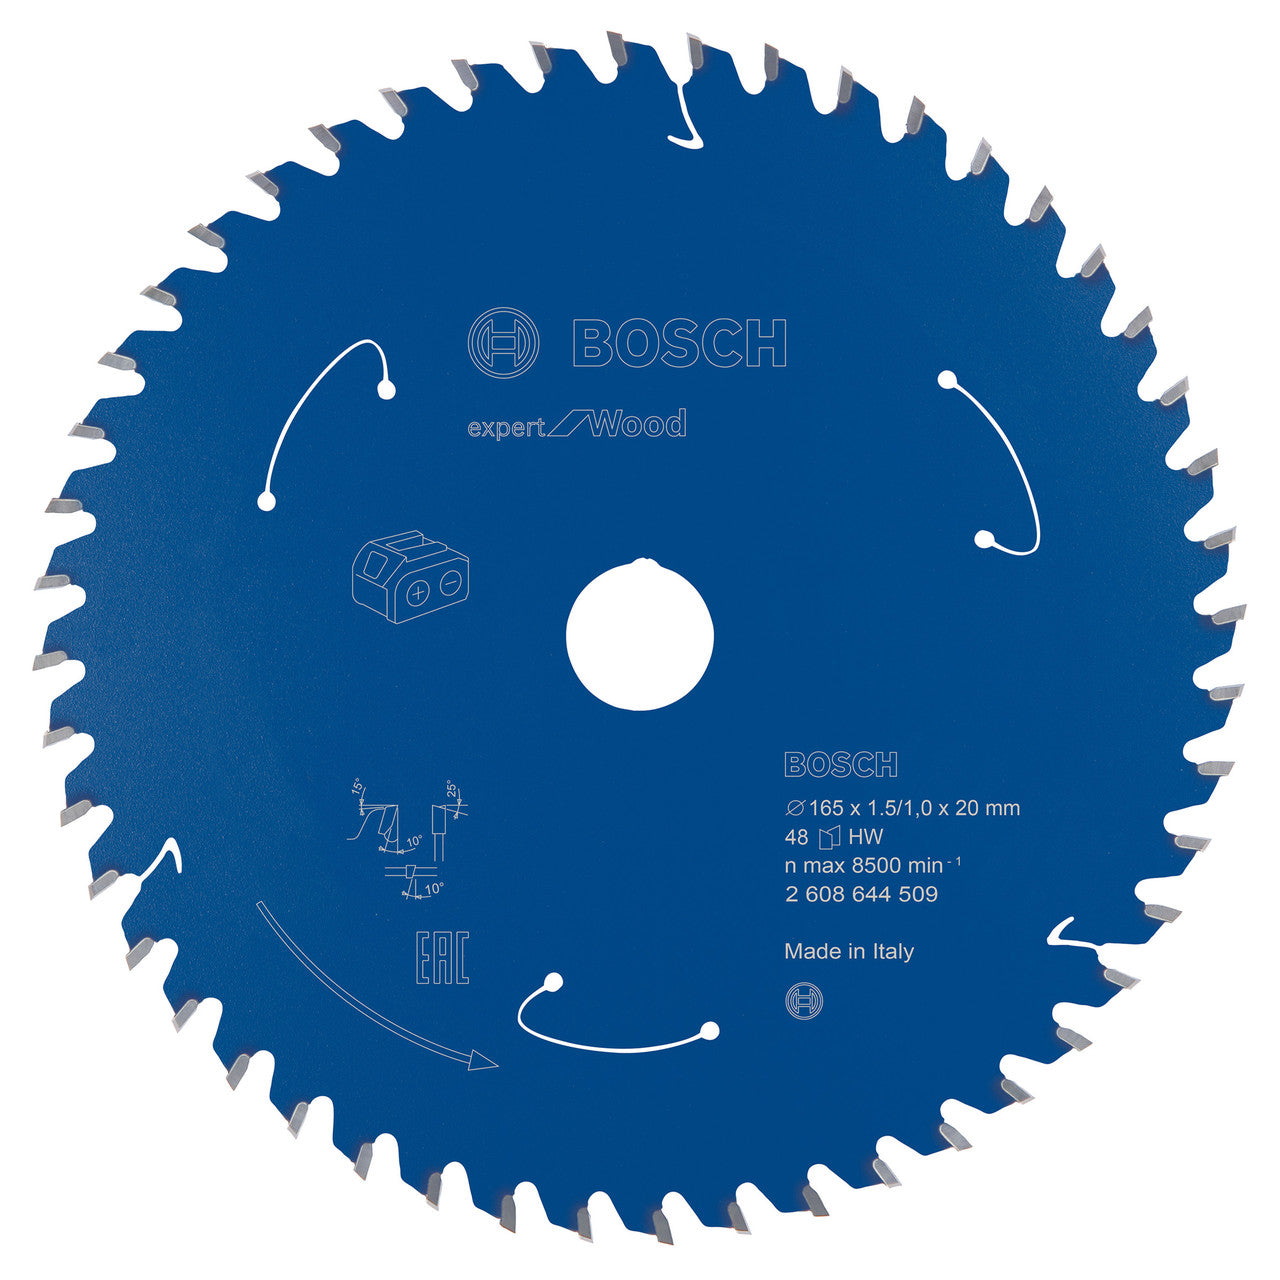 Bosch Expert Circular Saw Blade for Wood, GKS 18V, 160 x 20 x 1.5/1 mm, 48 2608644509 Power Tool Services